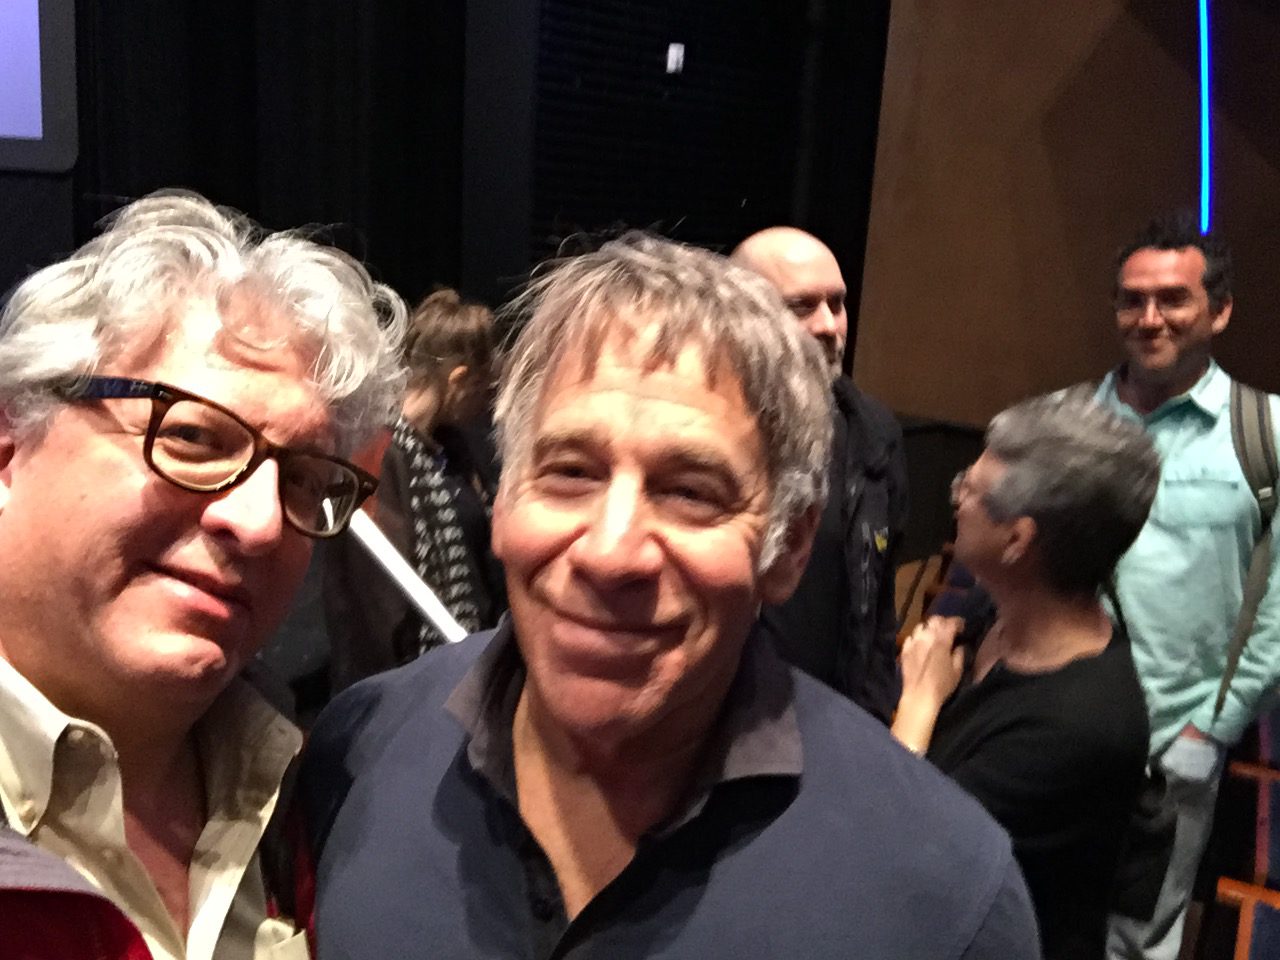 Photo of A Roadkill Opera's librettist Stephan Alexander Parker and Broadway composer/lyricist Stephen Schwartz (Wicked, Godspell, Pippin, The Magic Show, Schikaneder) at the ASCAP Musical Theatre Workshop LA 2018 at the Wallis Theatre.